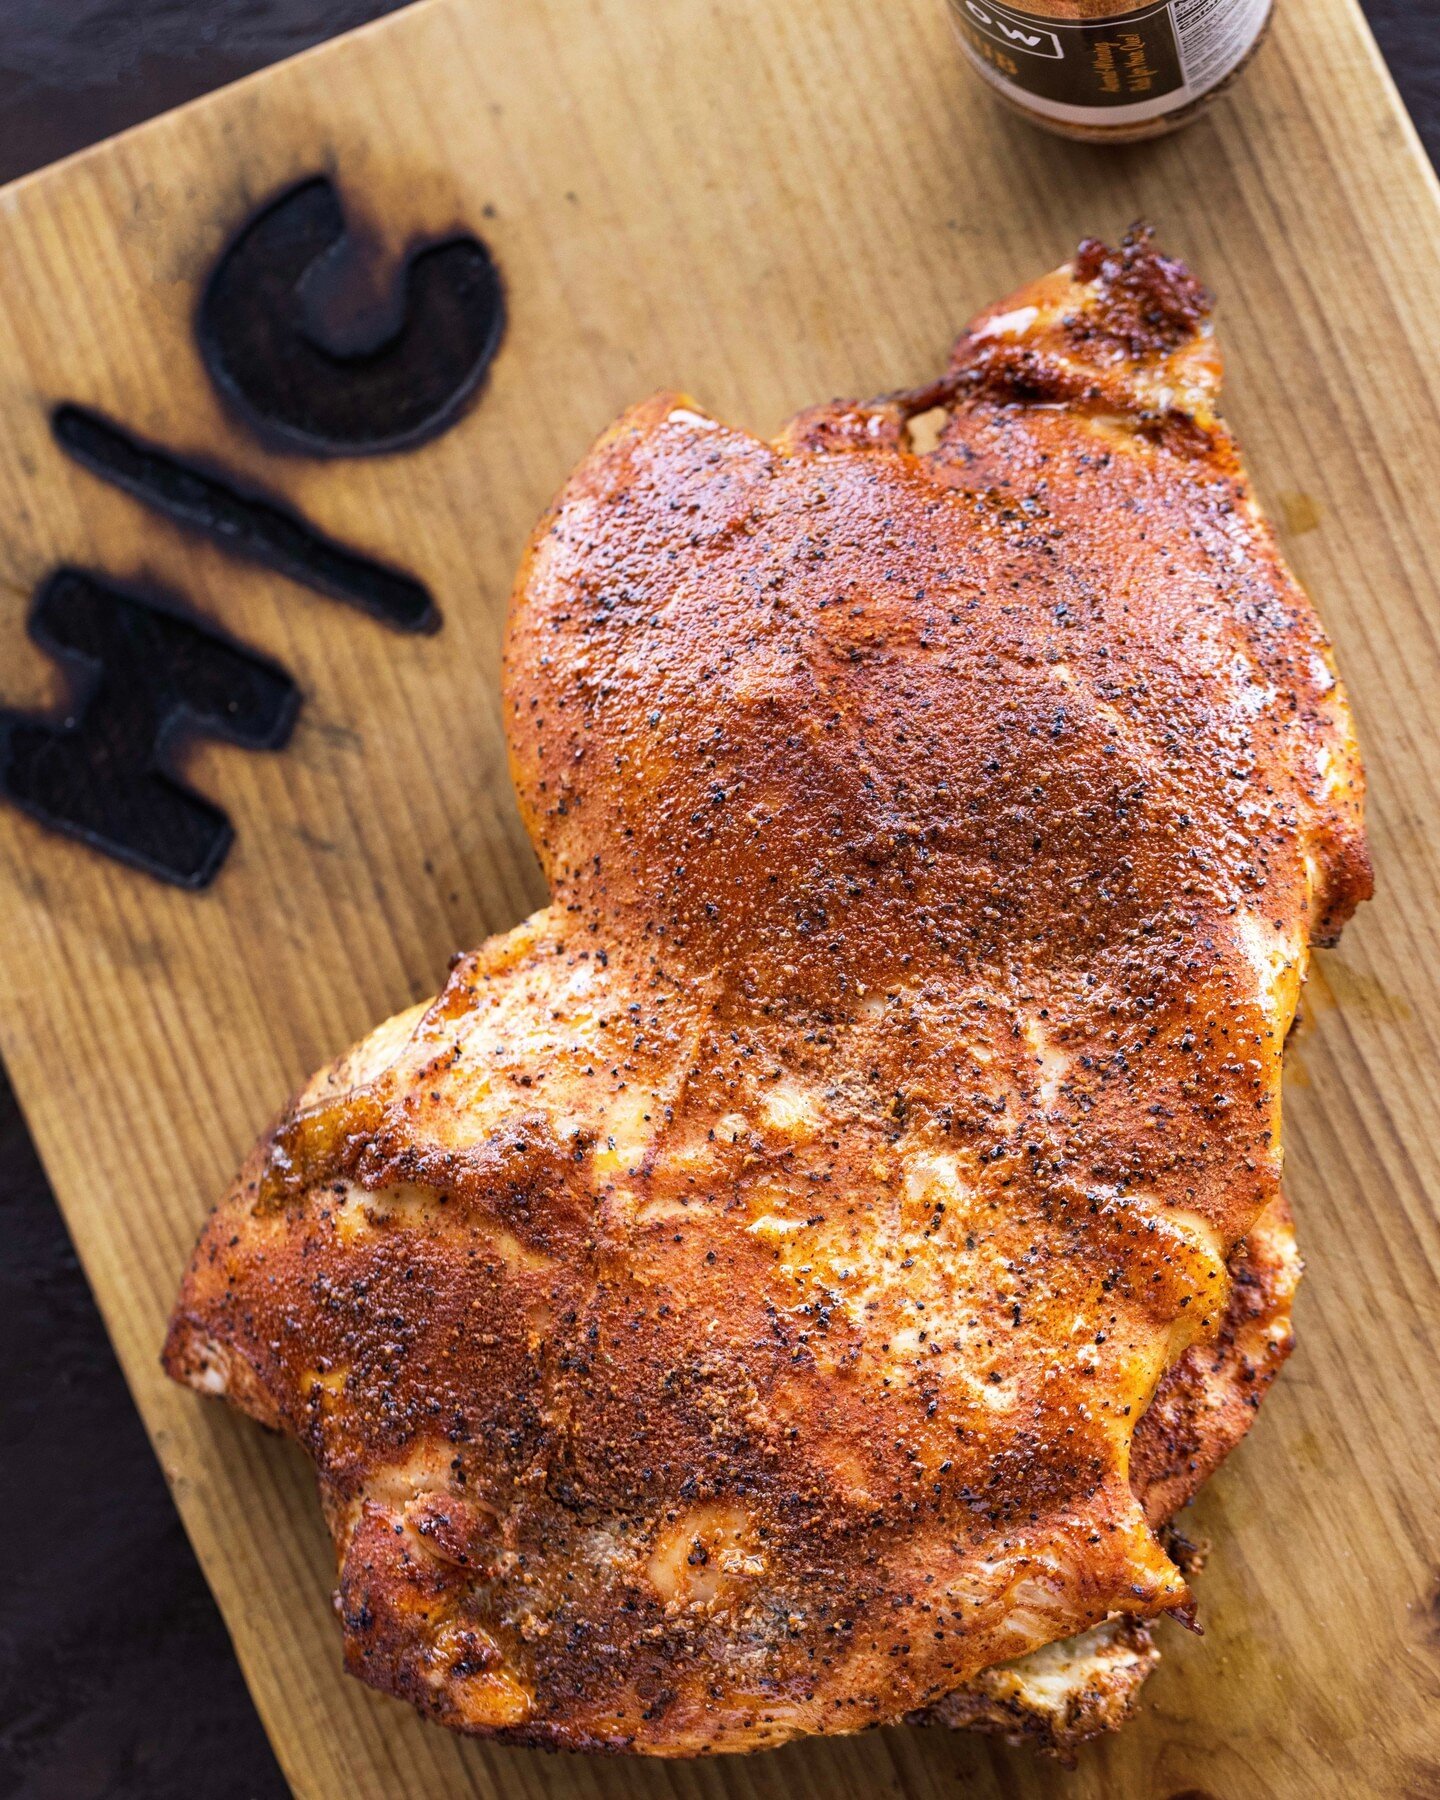 Introducing our NEW Mesquite Smoked Chicken just in time for Memorial Day!
Rubbed with our Signature Mesquite Rub and slow-smoked to perfection.